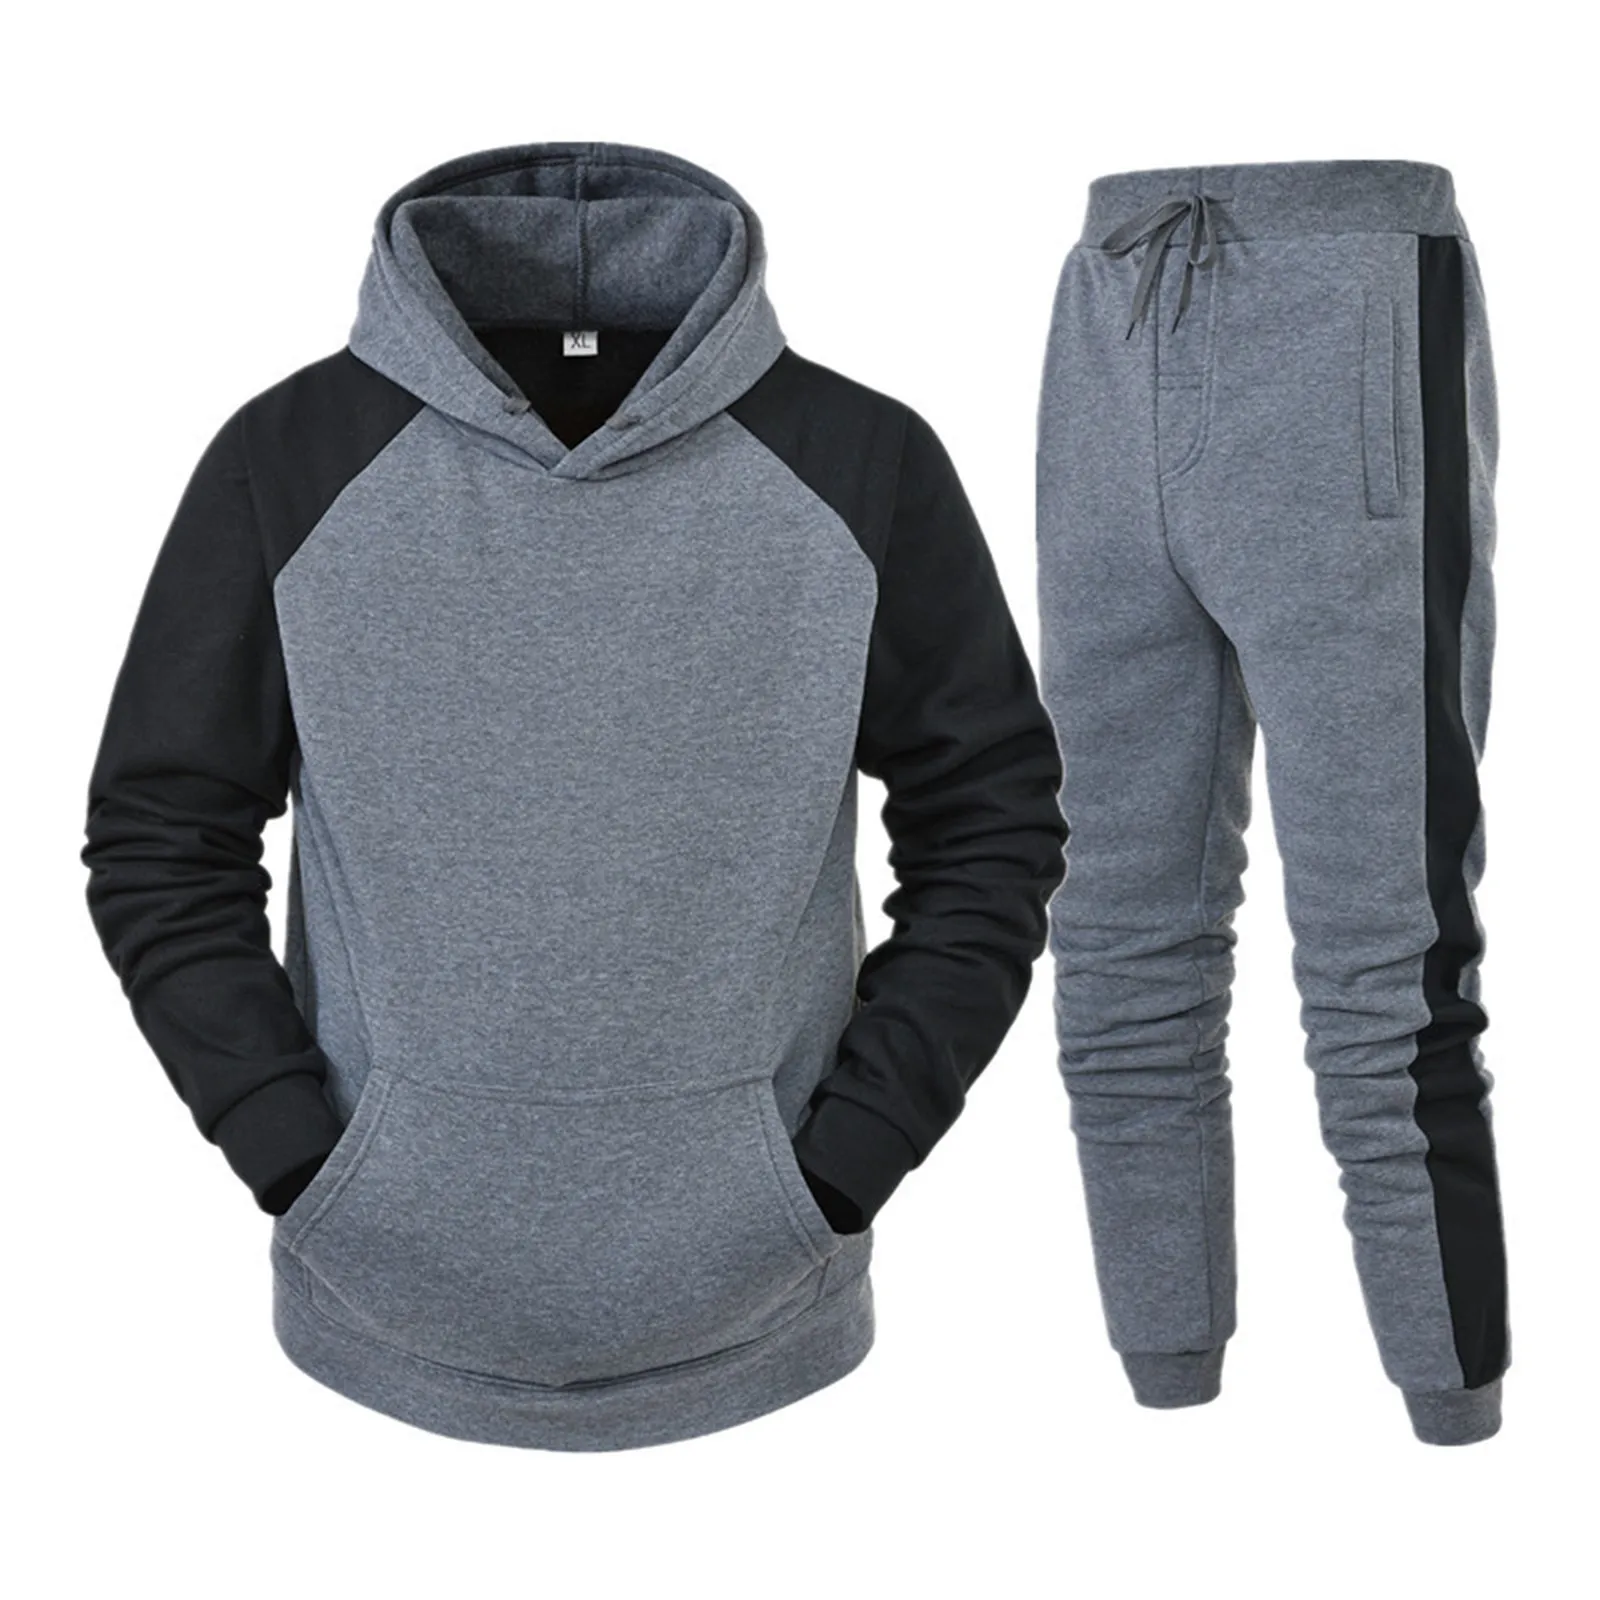 Men's Casual Clothing Men Hooded 2 Pieces Sets Spring Autumn Pullover+ Trousers Sets Male Sport Hoodies Suit Sportswear